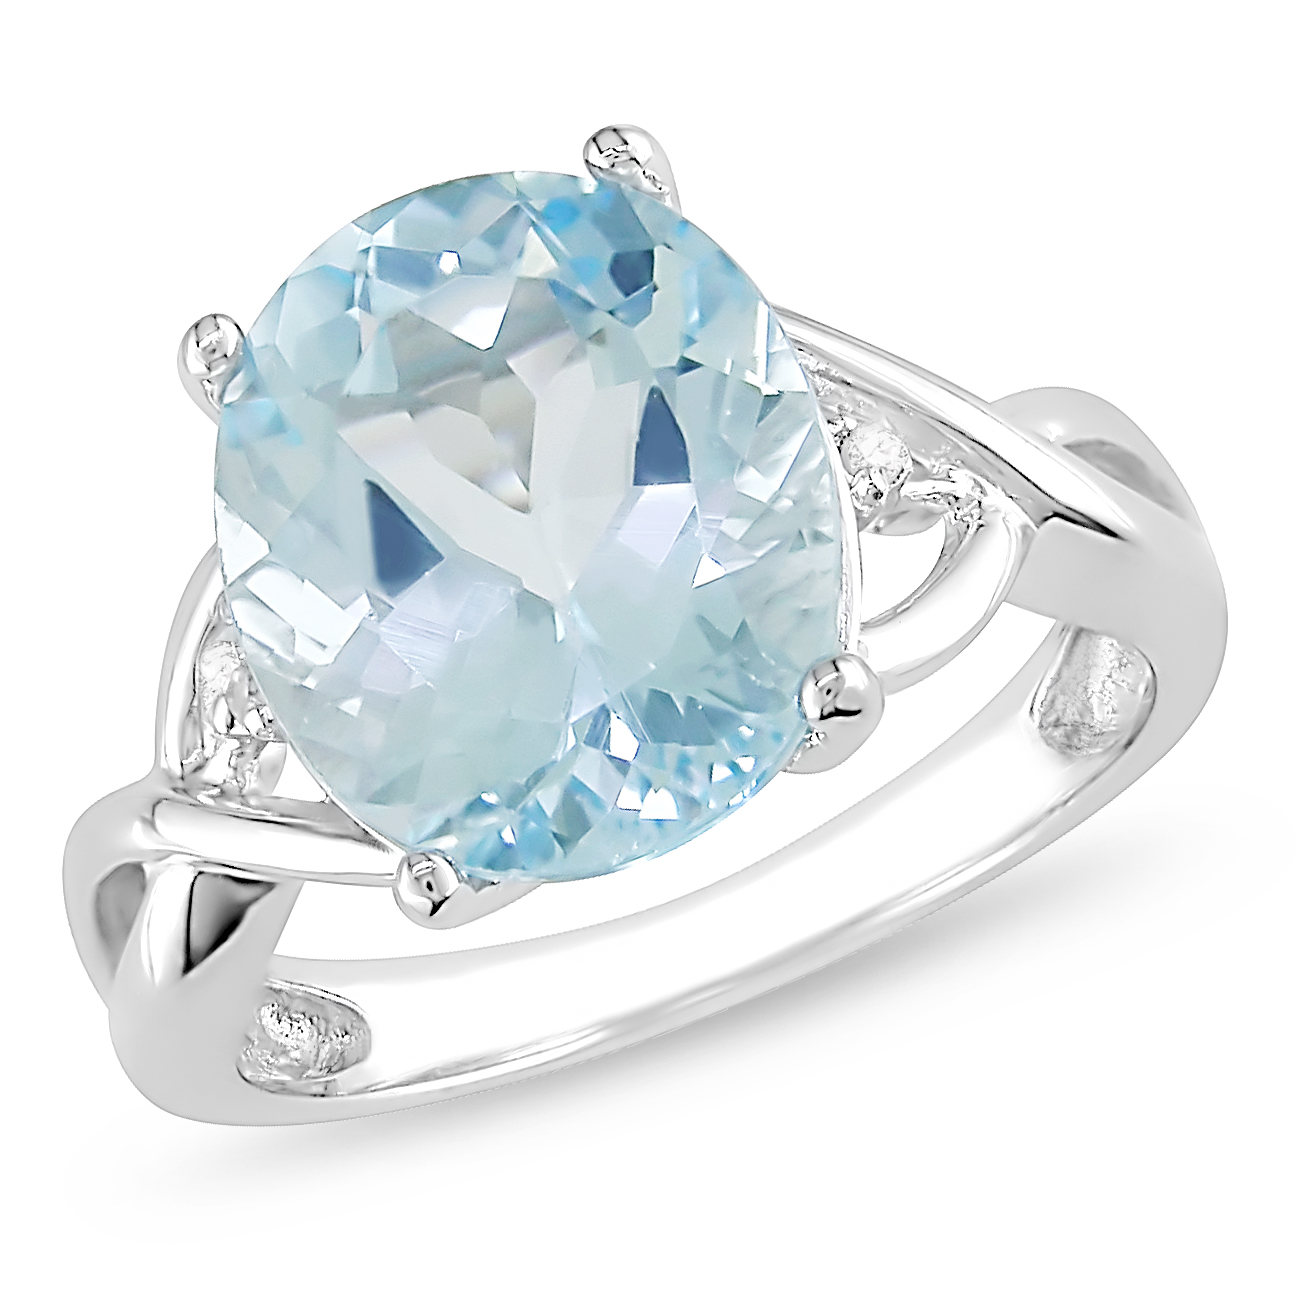 Amour 0.01 Carat T.W. Diamond and 5 1/2 Carat T.G.W. Blue Topaz Fashion Ring in Sterling Silver I3